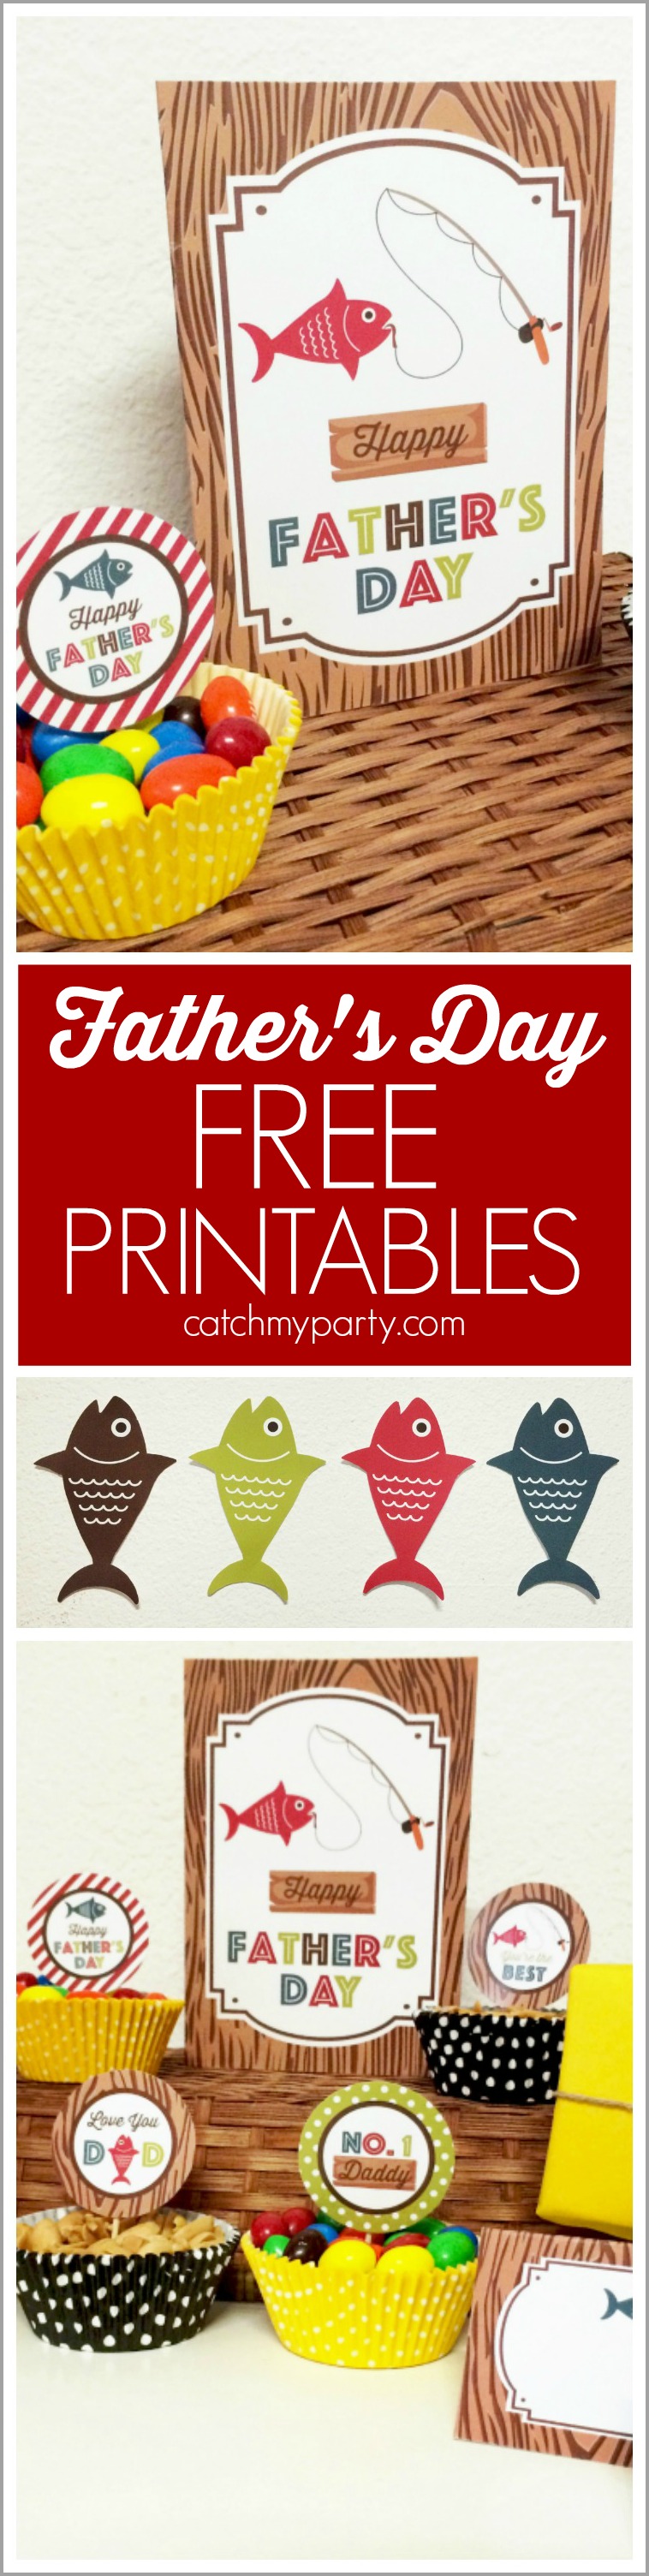 I Love Fishing Father s Day Free Printables Catch My Party